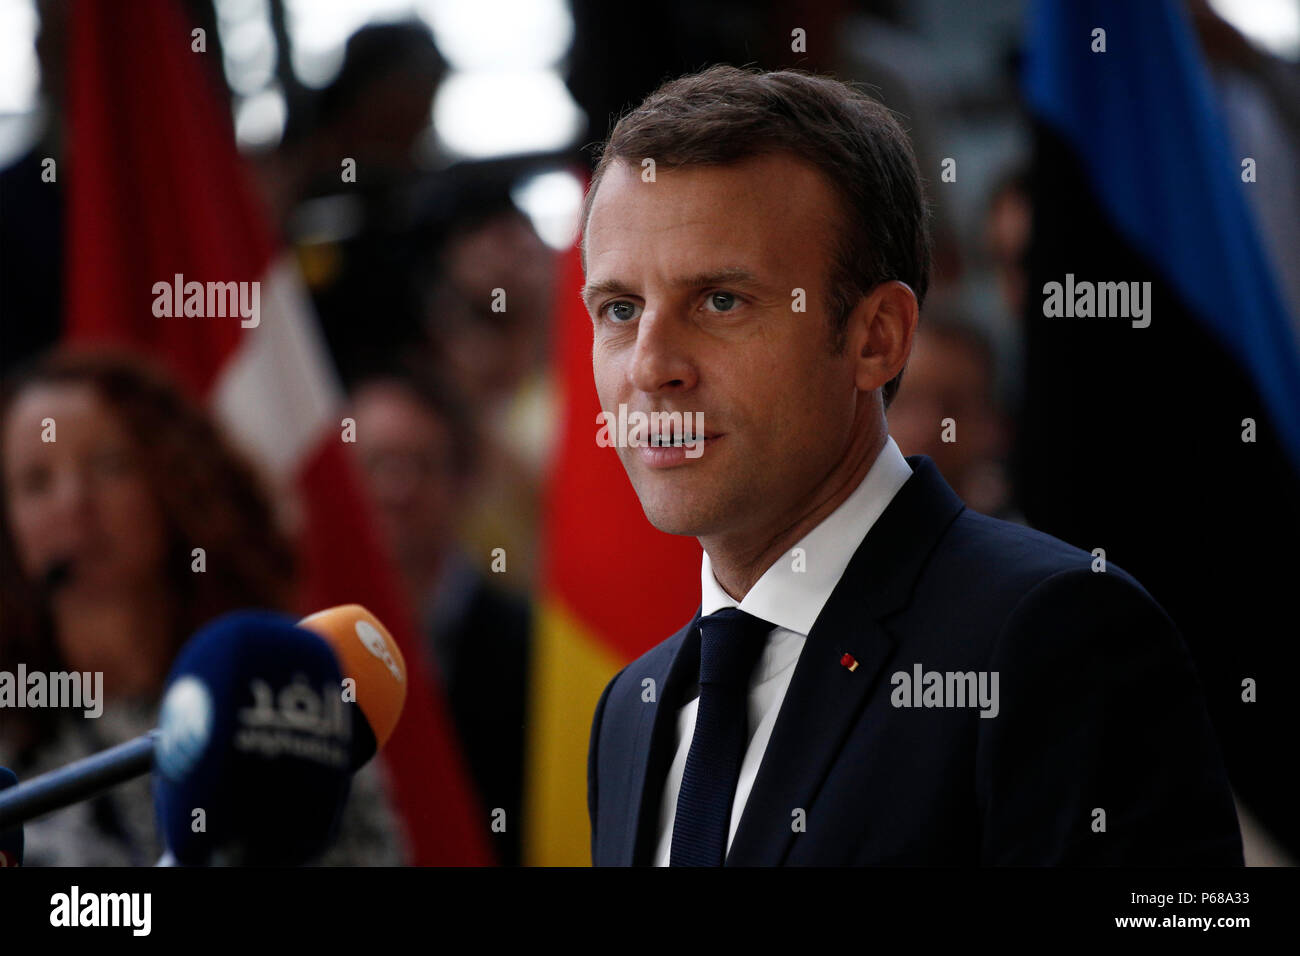 Brussels, Belgium on Jun. 28, 2018. President of France Emmanuel Macron arrives for a meeting with European Union leaders. Stock Photo